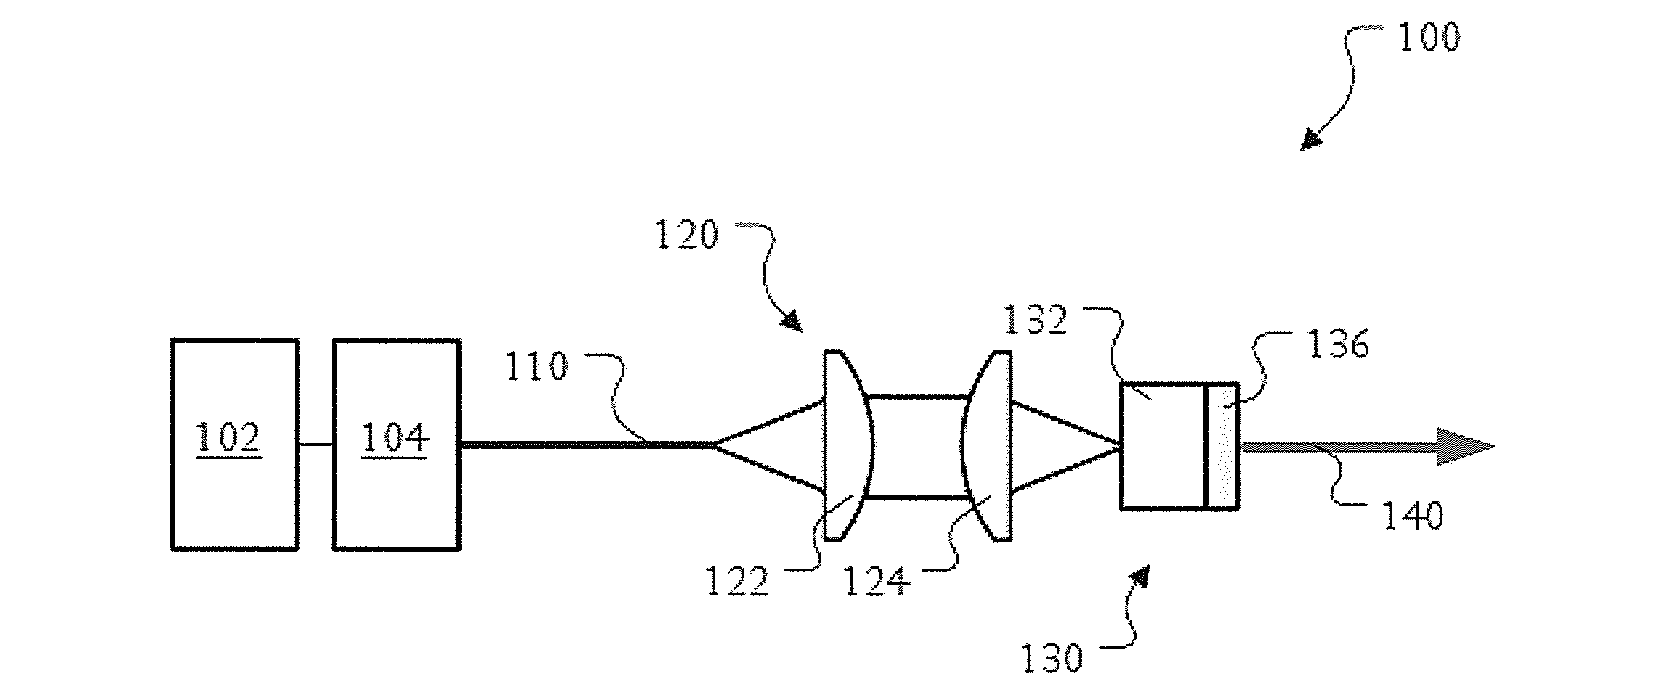 Laser system and method for producing a linearly polarized single frequency output using polarized and non-polarized pump diodes